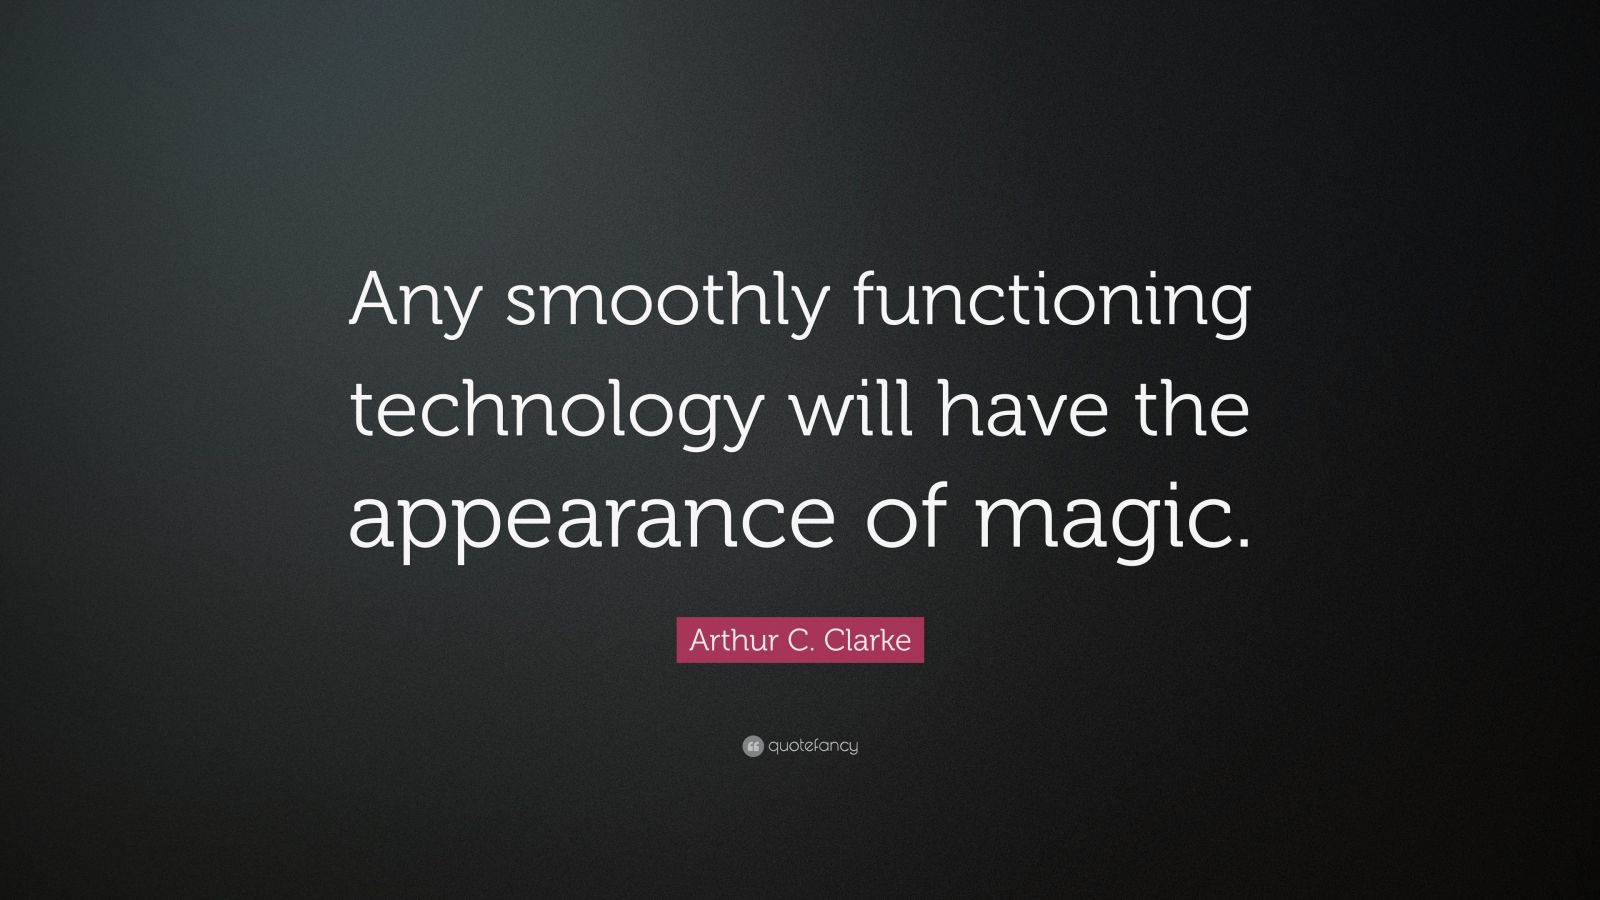 Arthur C. Clarke Quote: “Any smoothly functioning technology will have ...